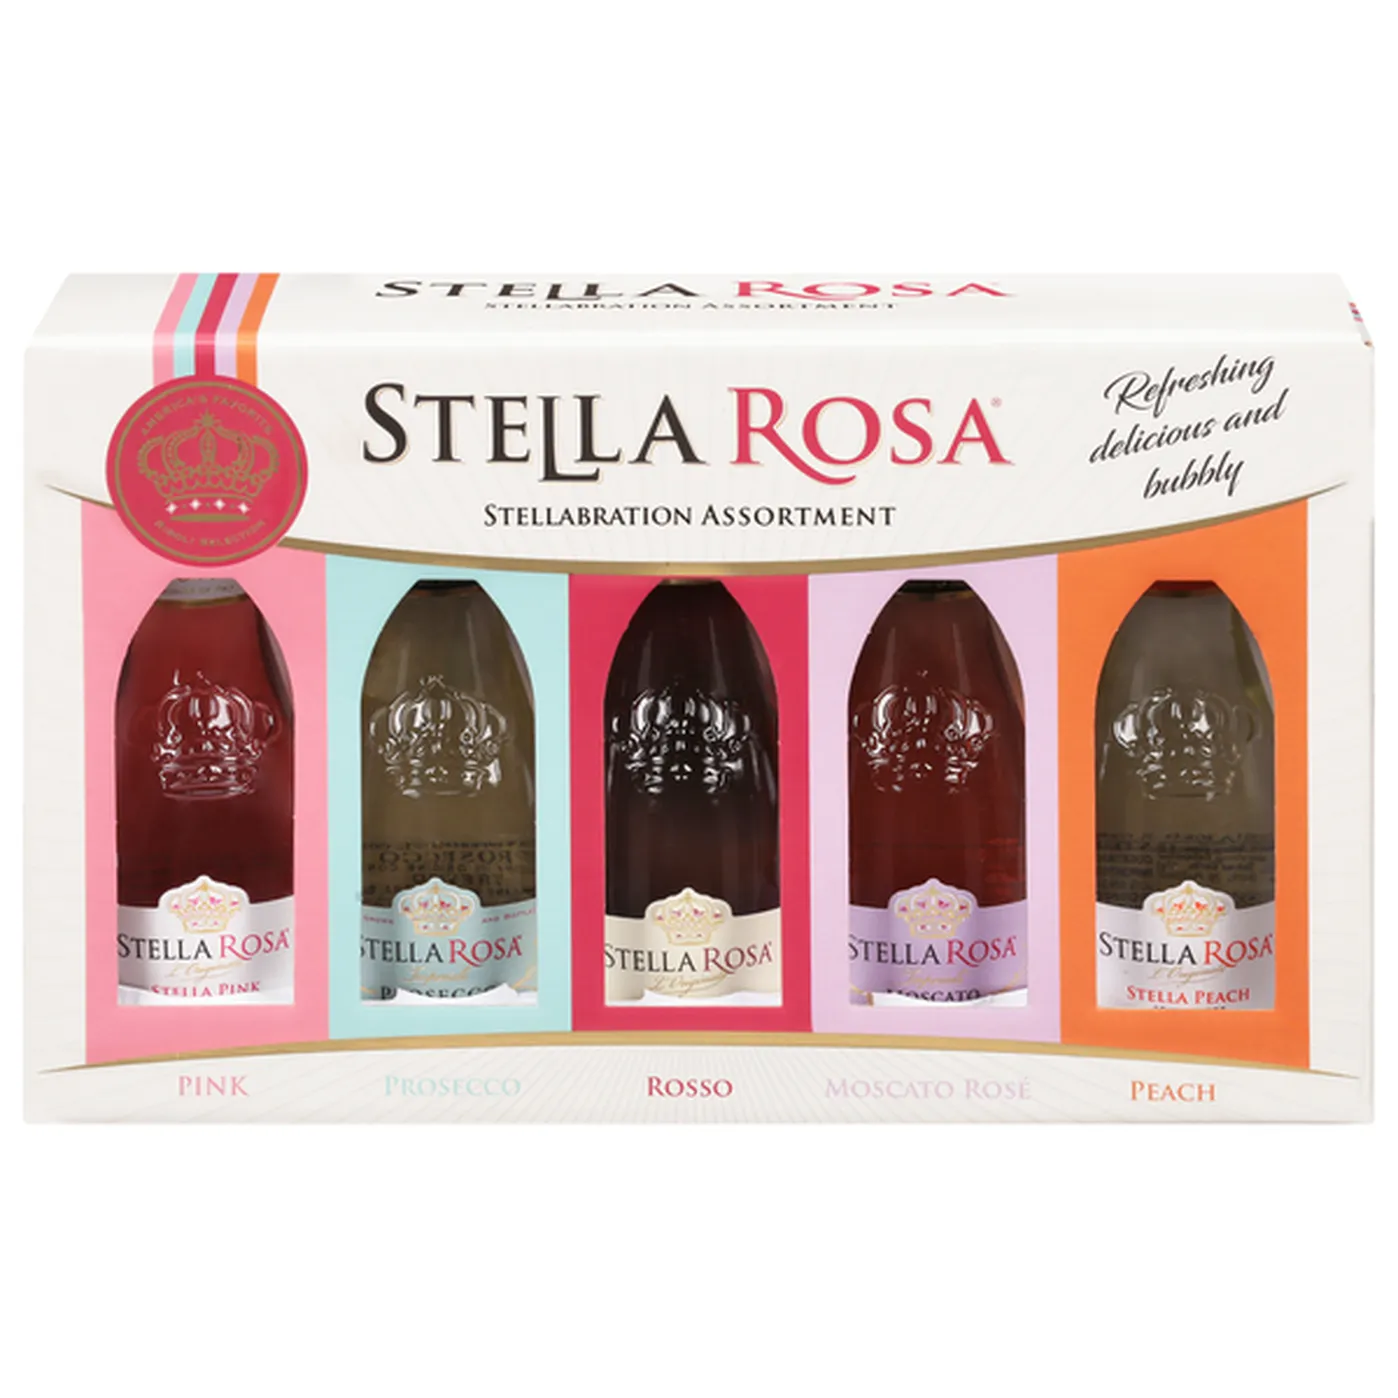 Stella Rosa Wine Stellabration Assortment Ml Delivery Or Pickup